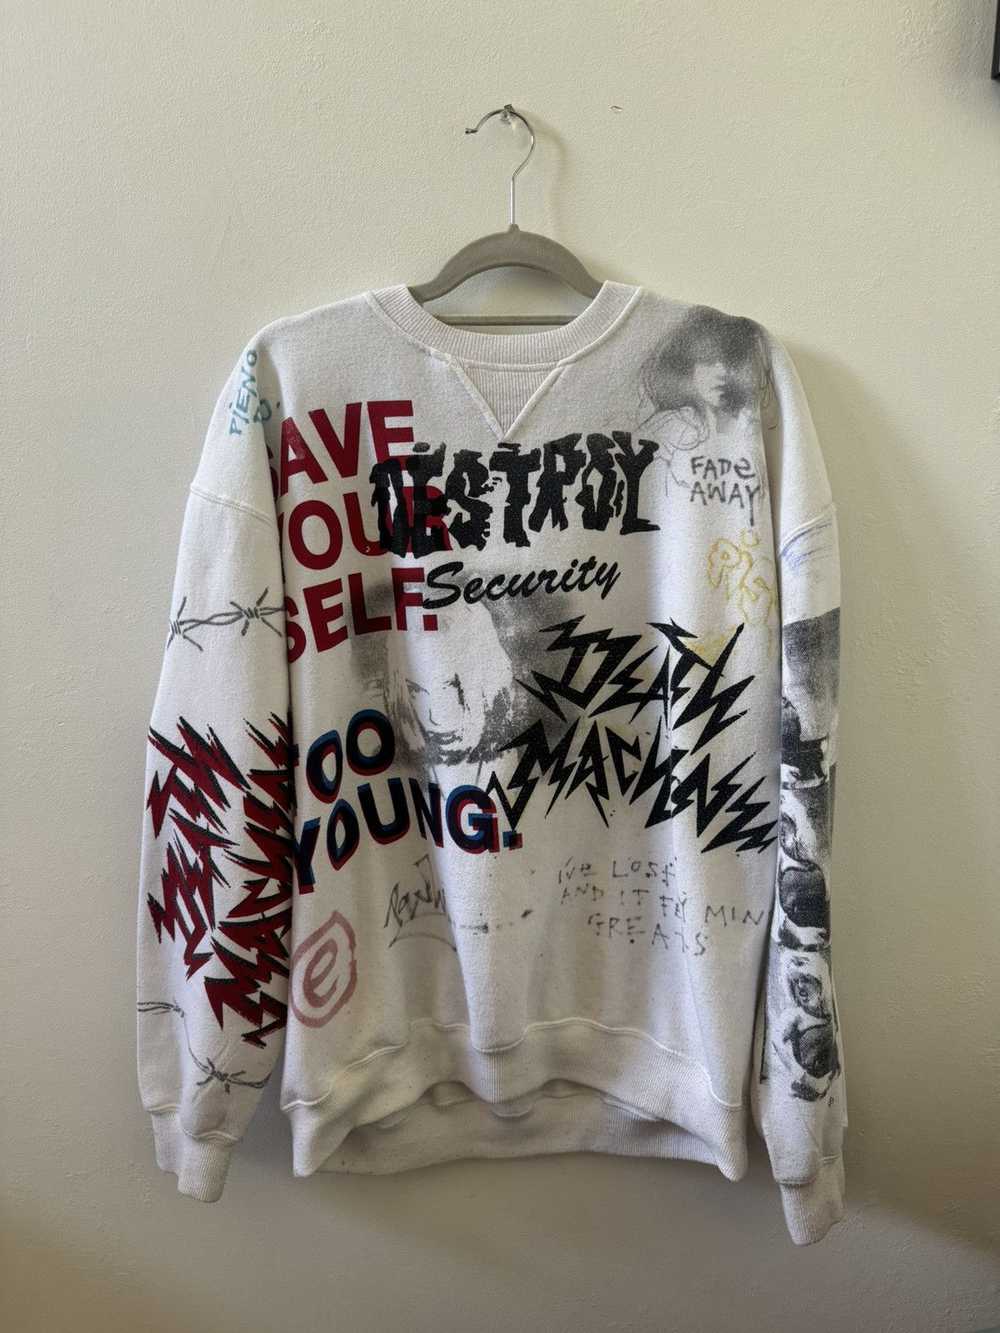 Asap Rocky × Vlone Himumimdead “Pauly” 1 of1 crew… - image 1